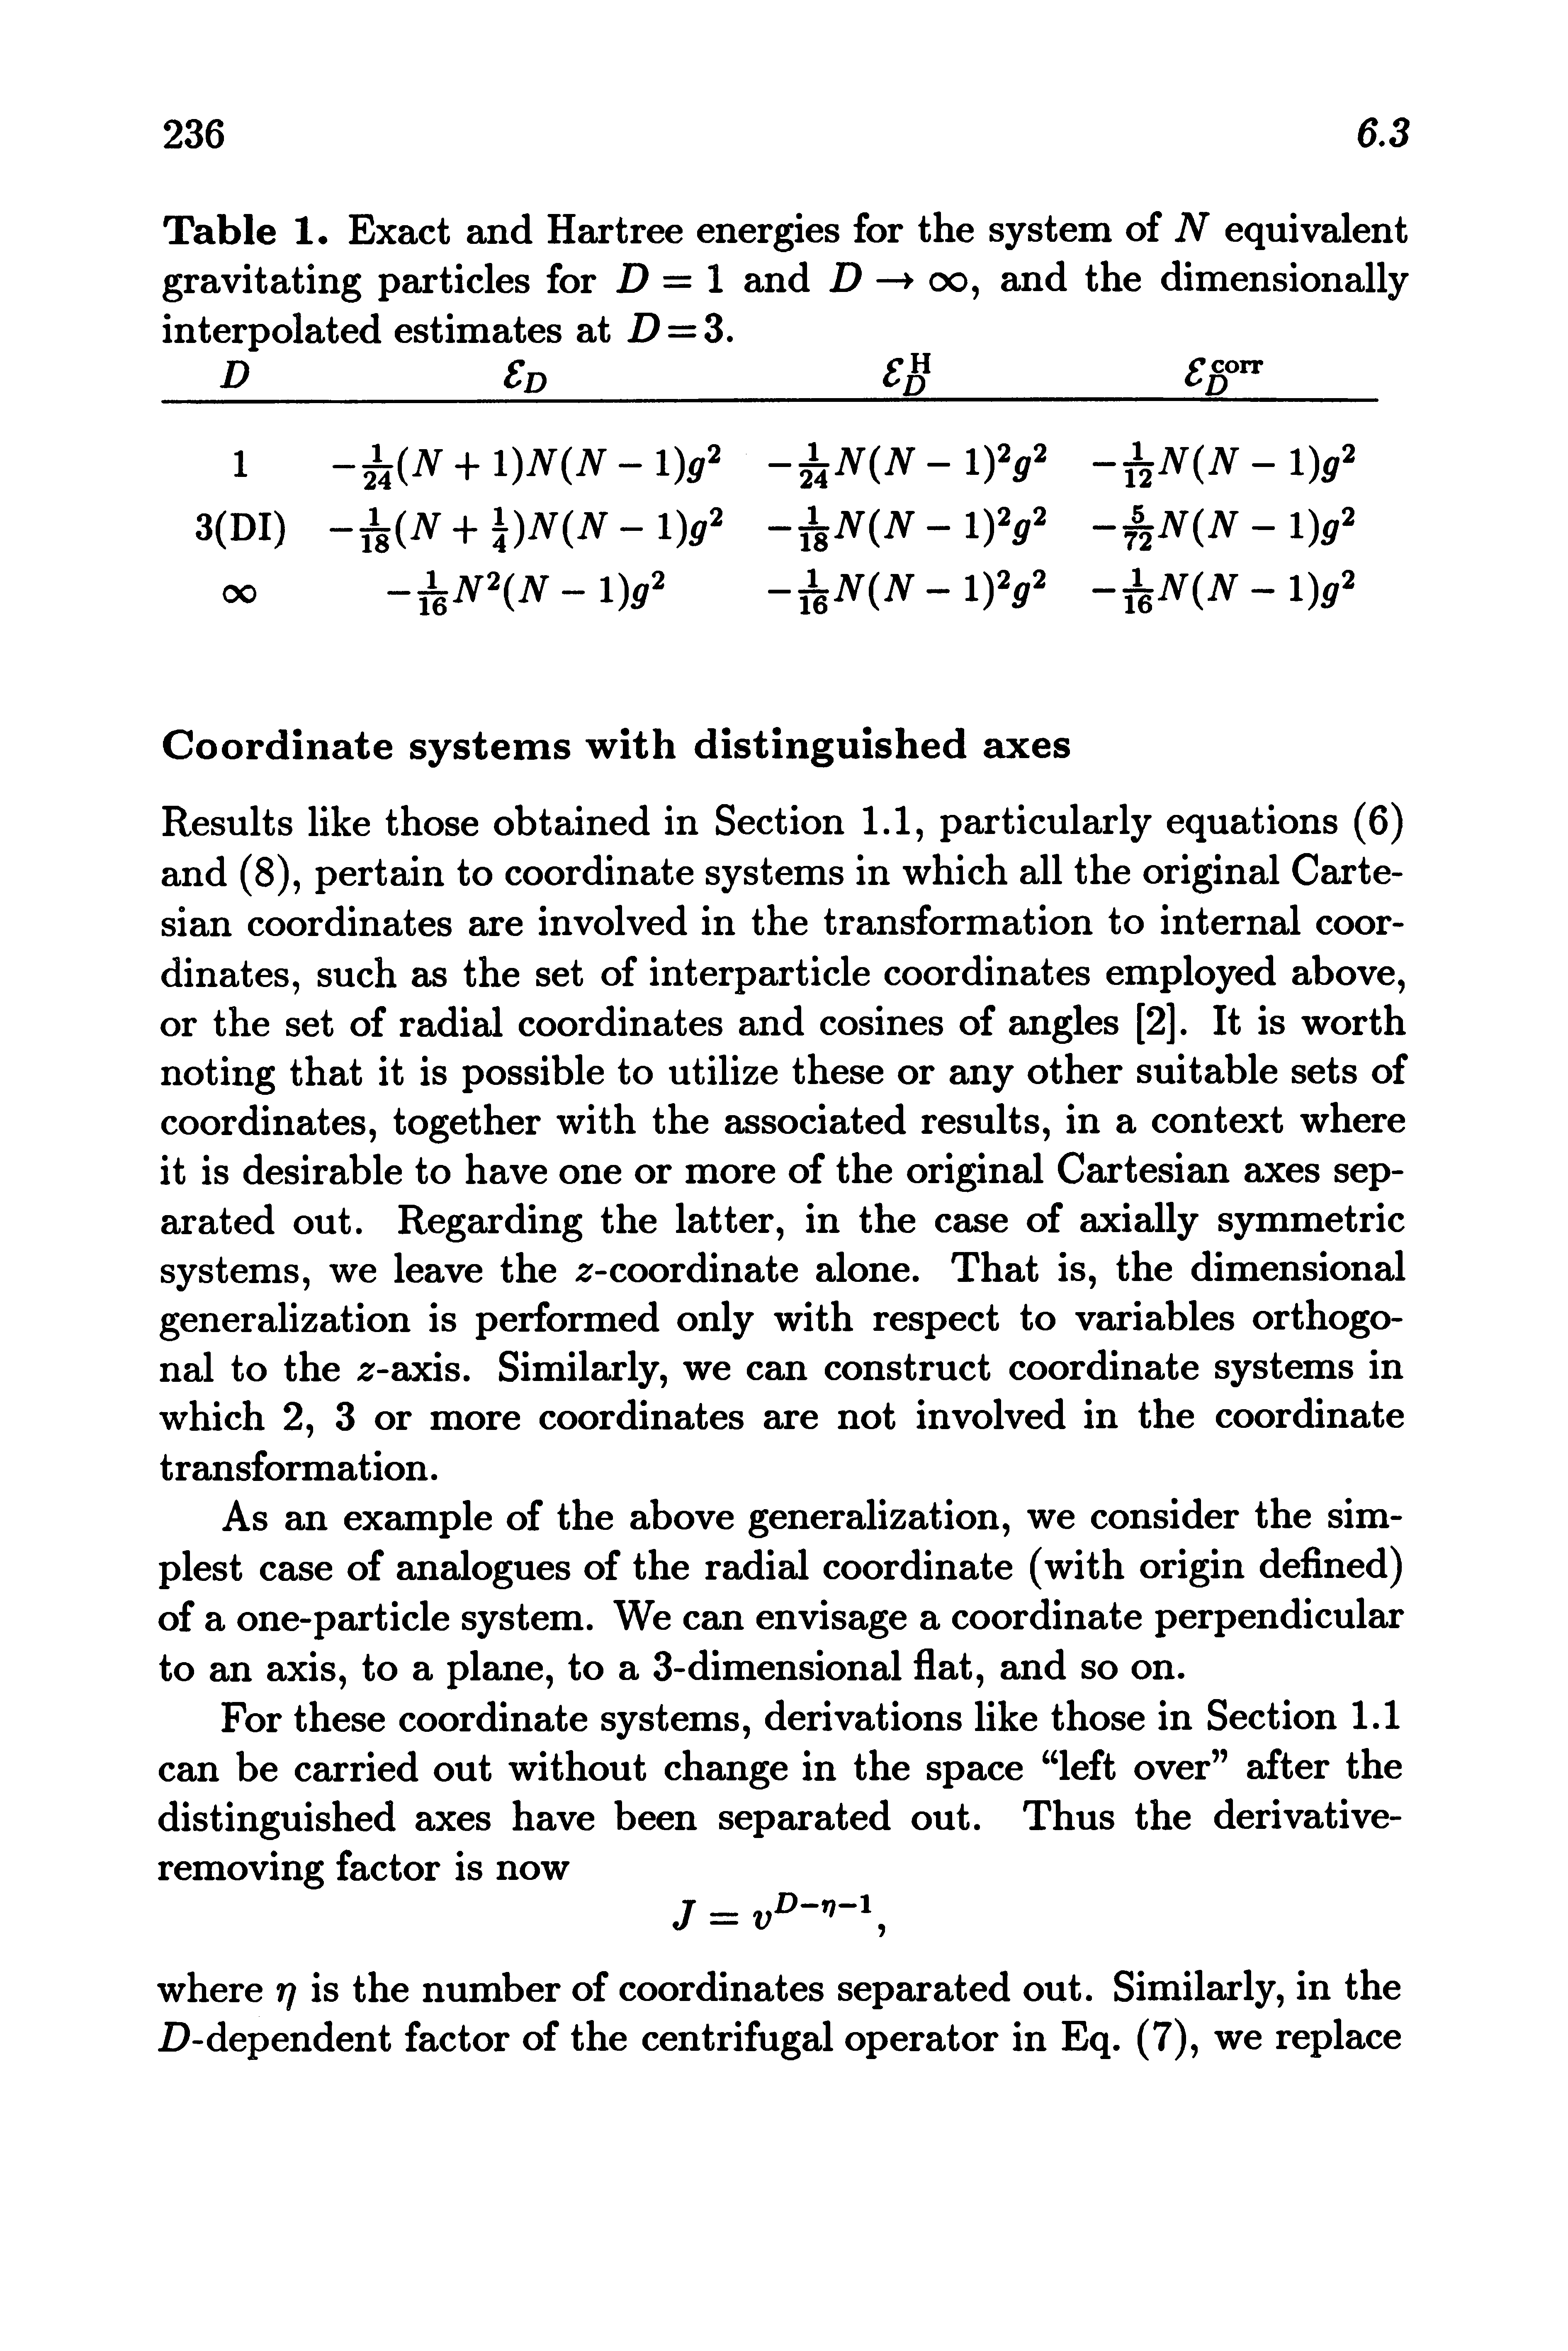 Table 1. Exact and Hartree energies for the system of N equivalent gravitating particles for D = 1 and D oo, and the dimensionally interpolated estimates at D = 3.